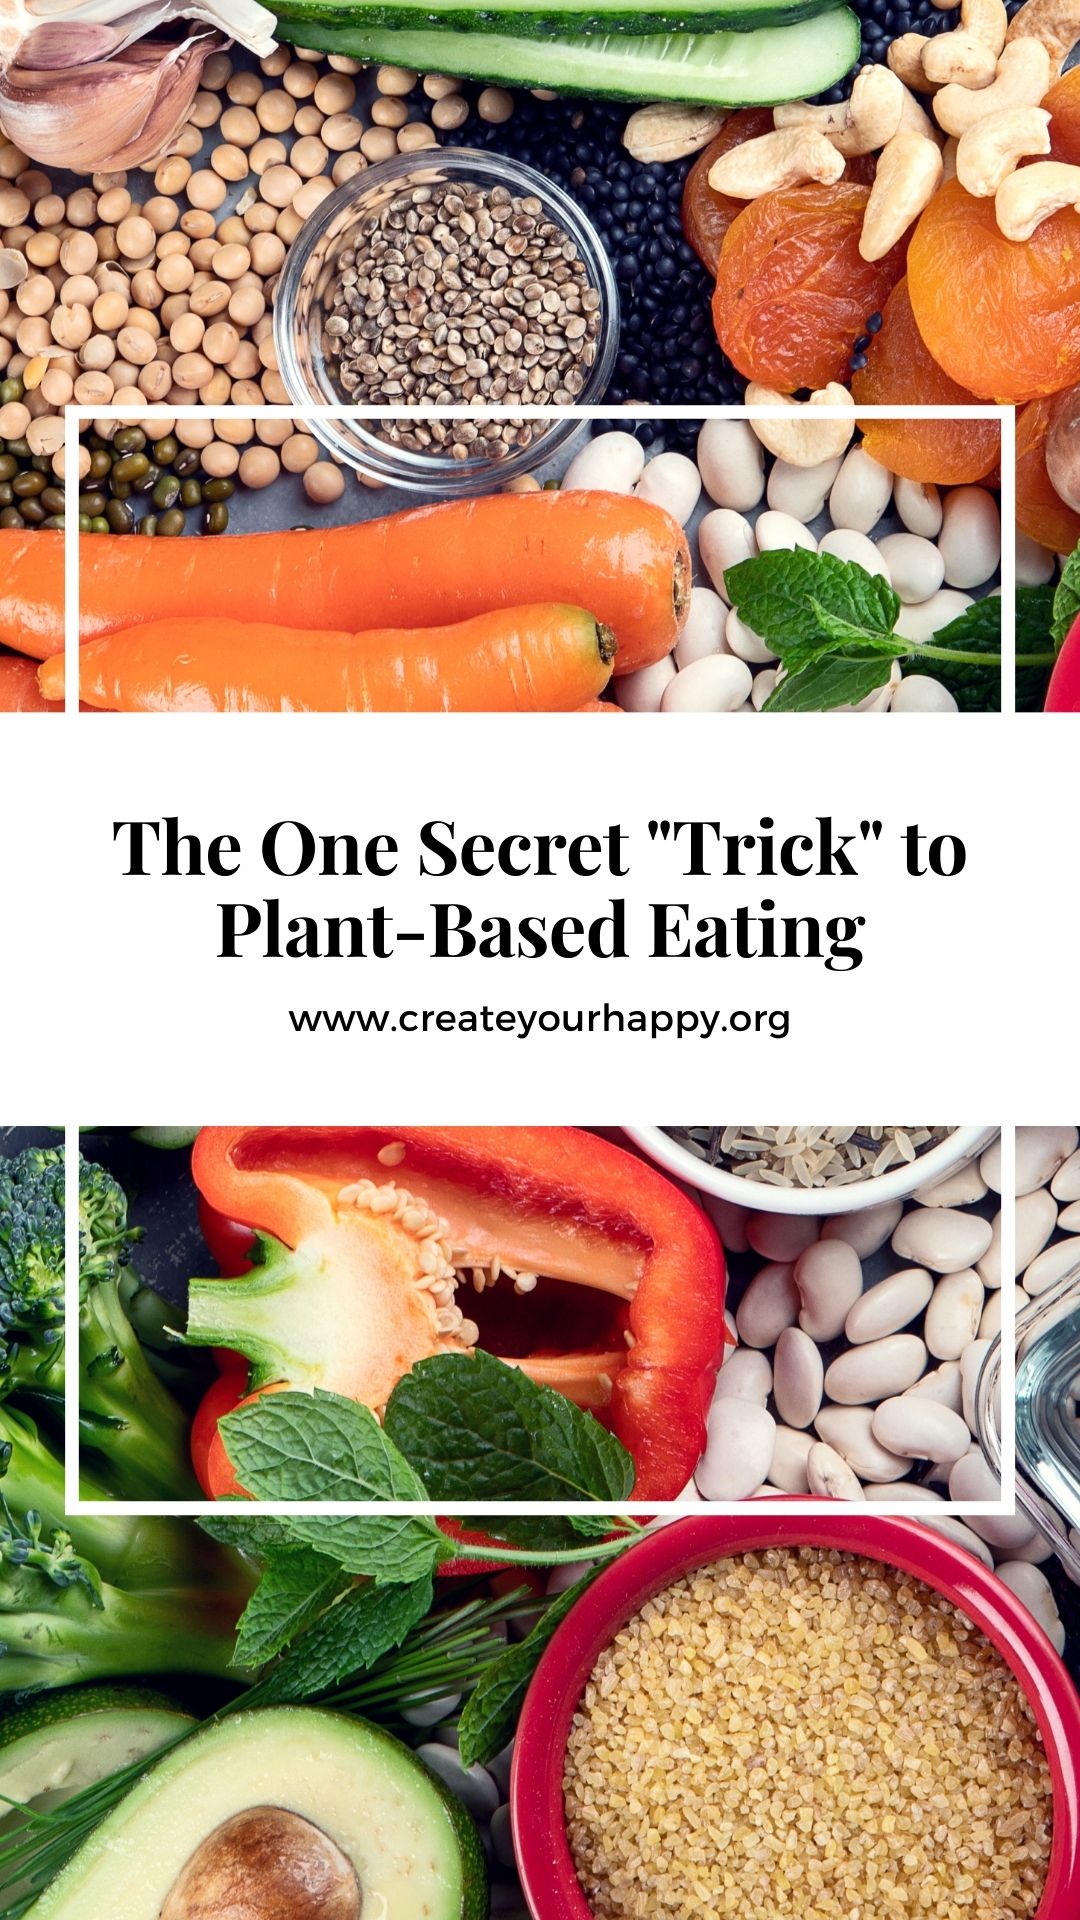 The One Secret “Trick” To Plant-Based Eating